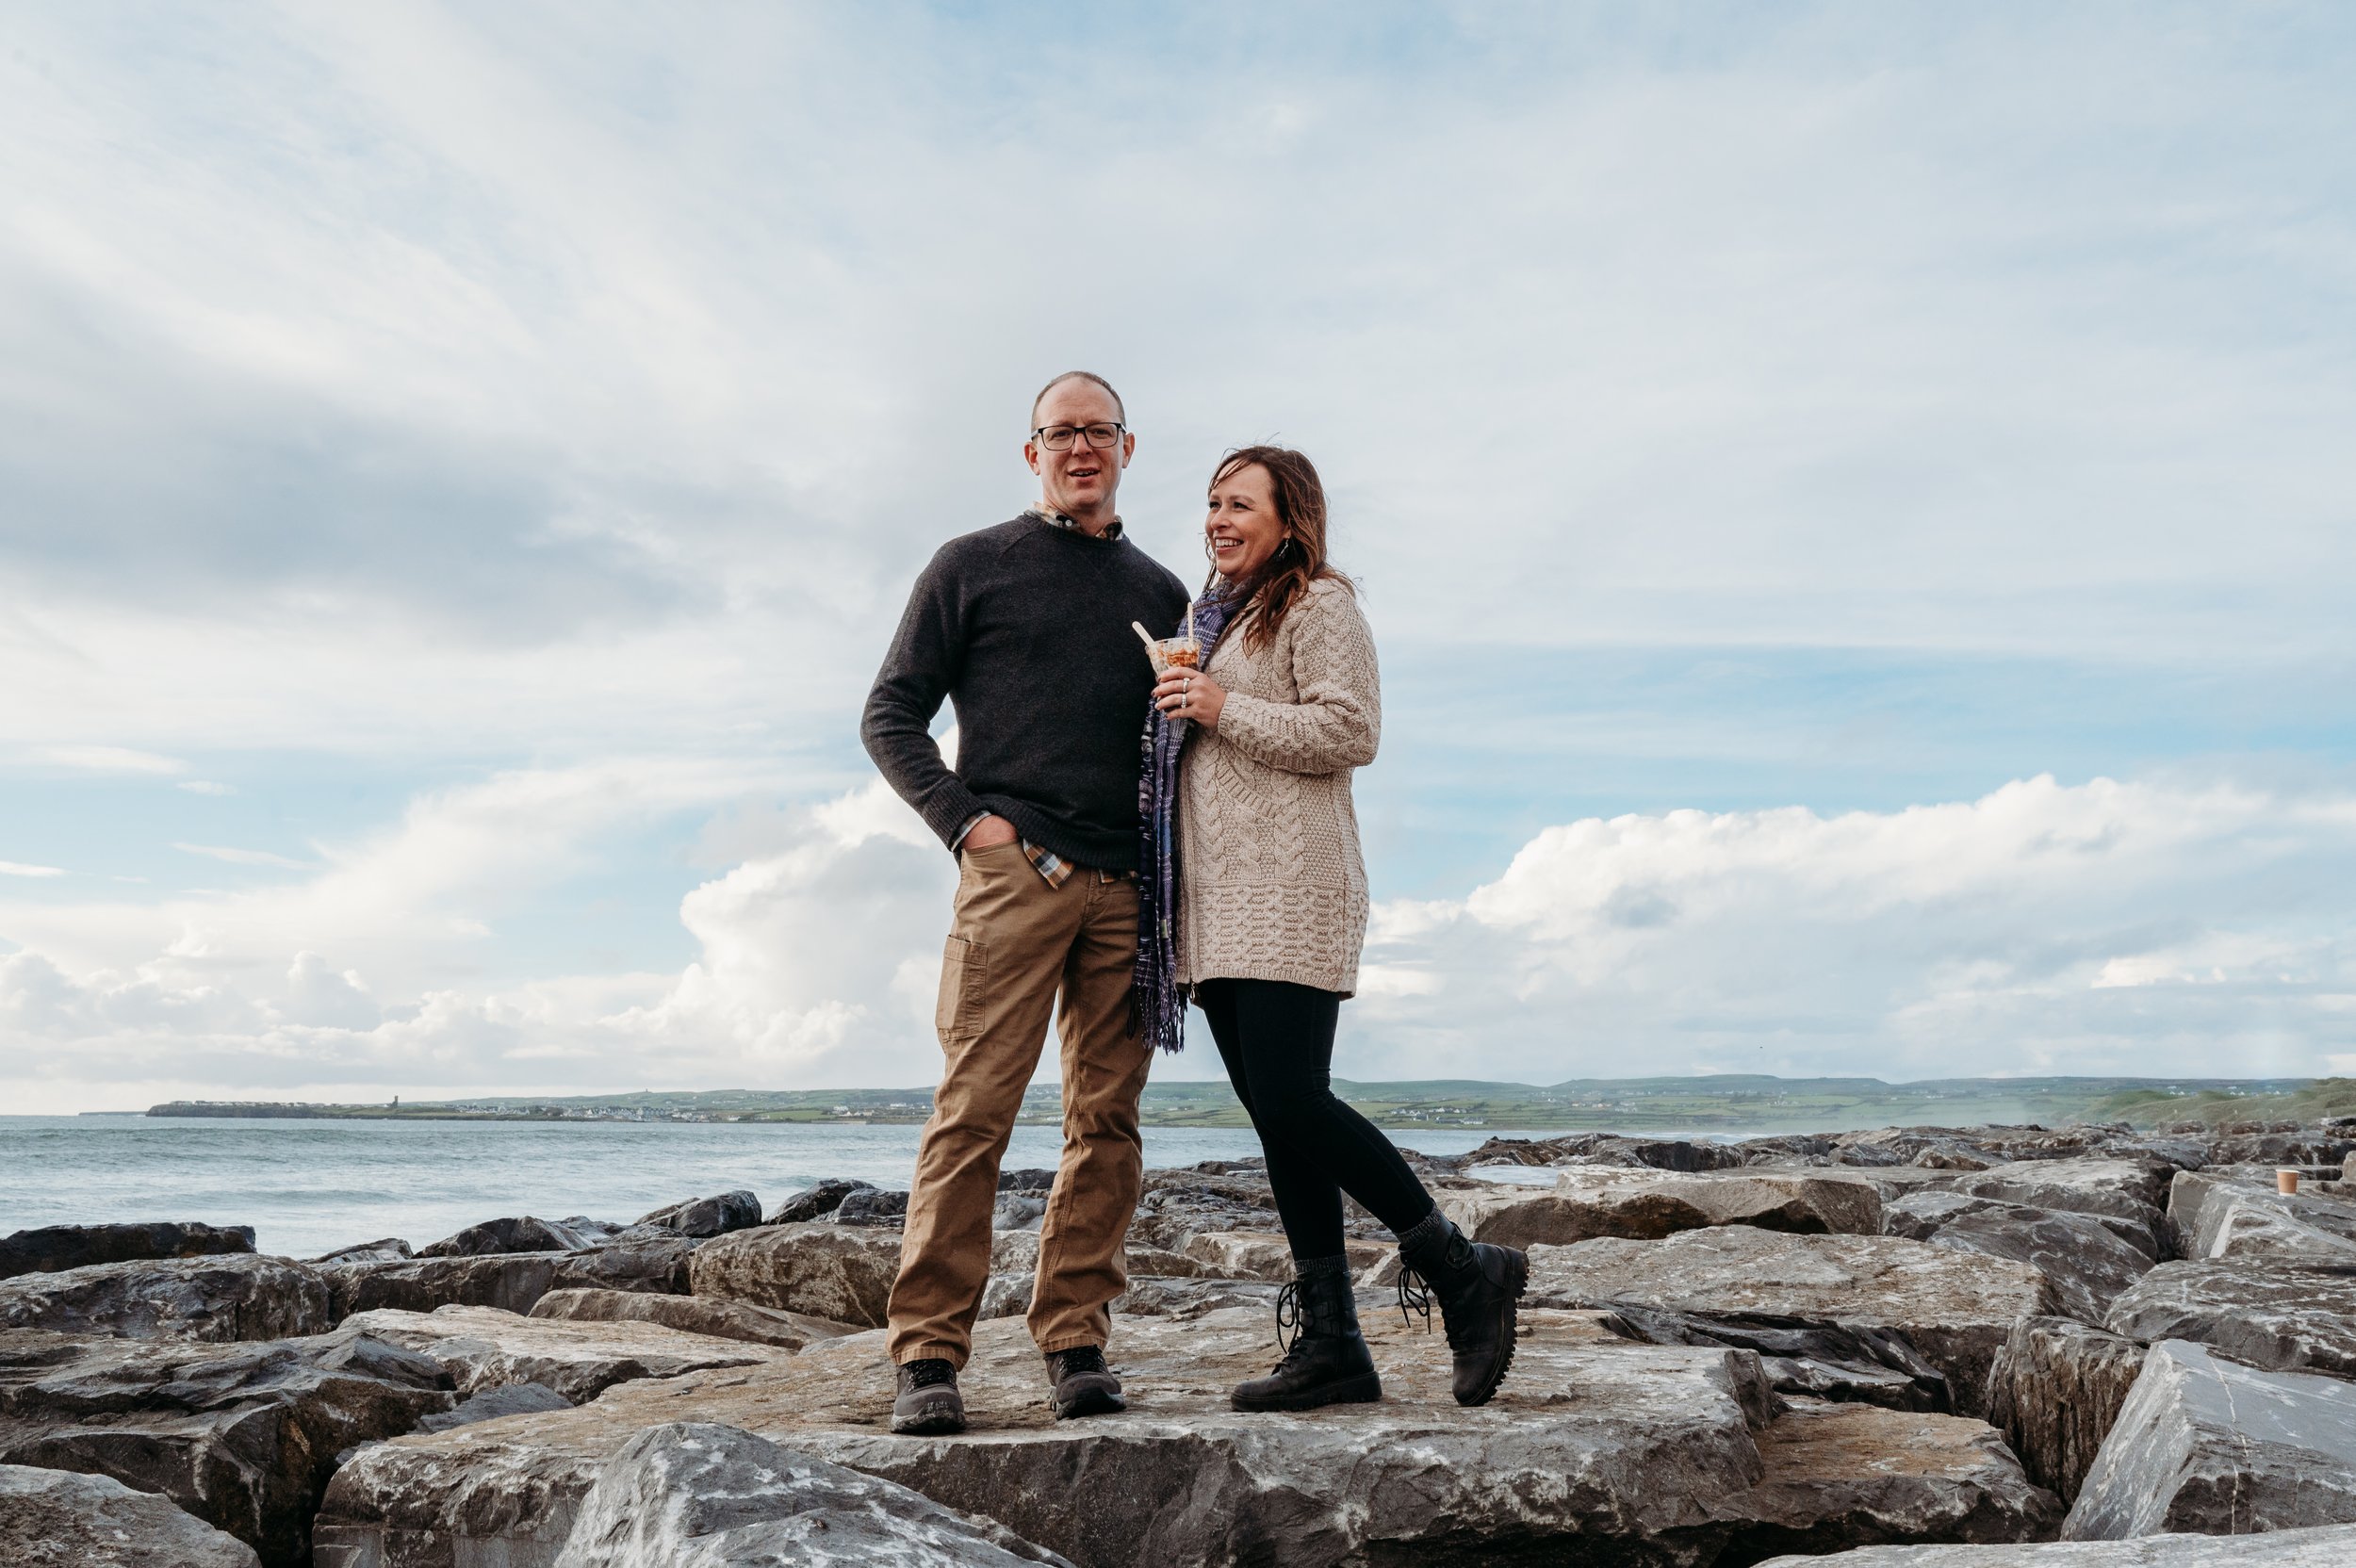 Marie O'Mahony photographer Lahinch anniversary couples photo session standing on rocks